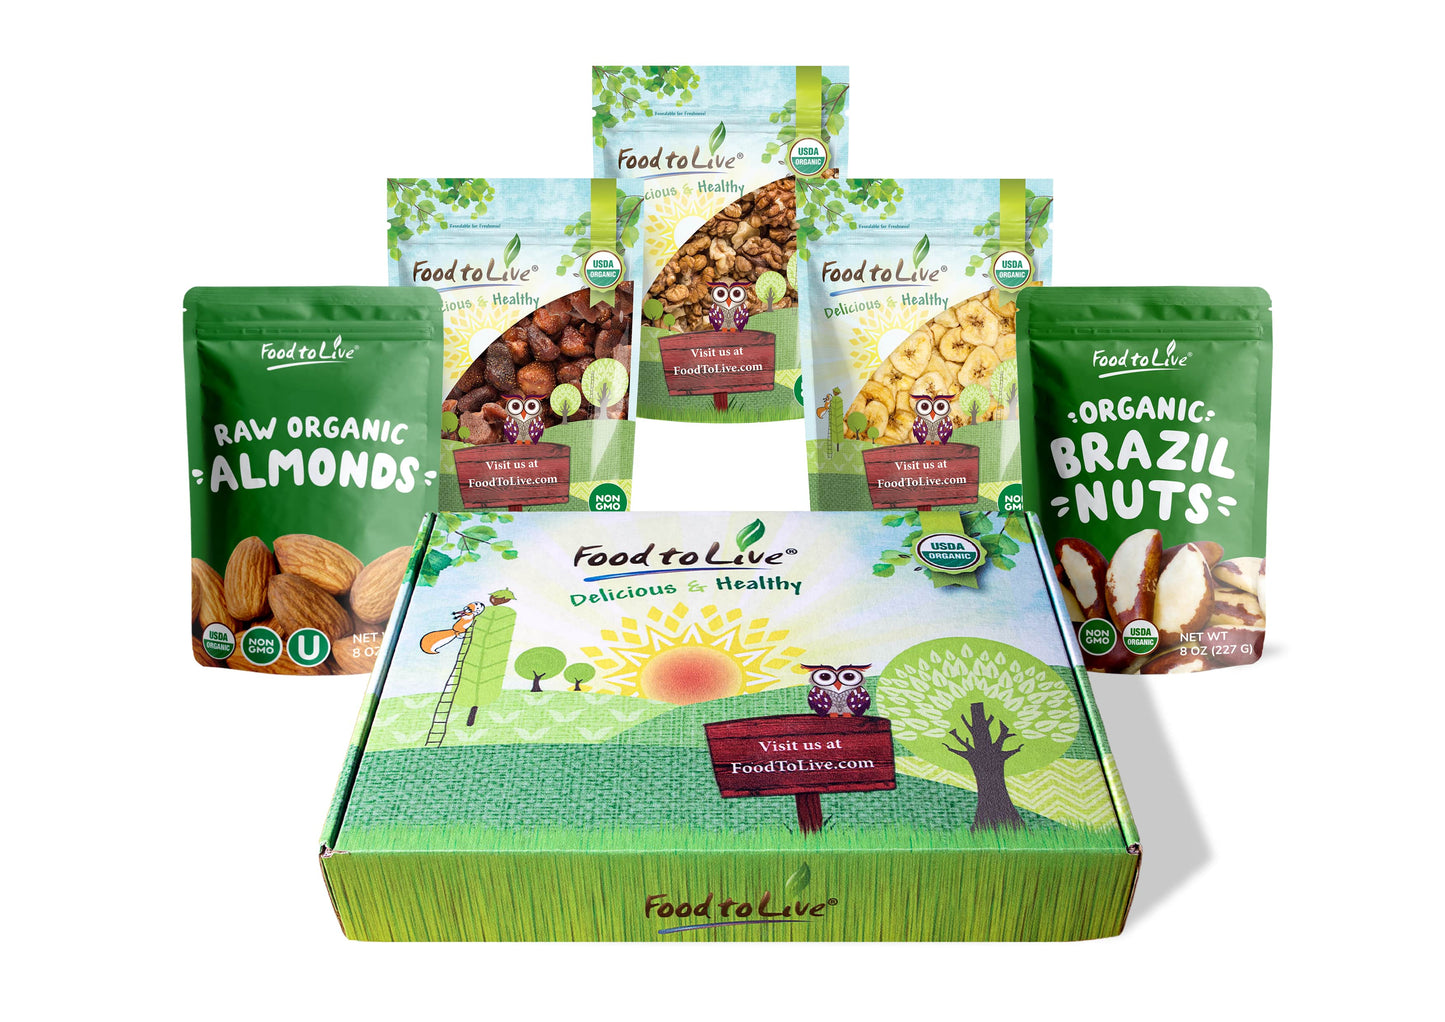 Organic Gift Box for Food Lovers - Dried Strawberries, Raw Almonds, Brazil Nuts, Walnuts and Banana Chips - by Food to Live